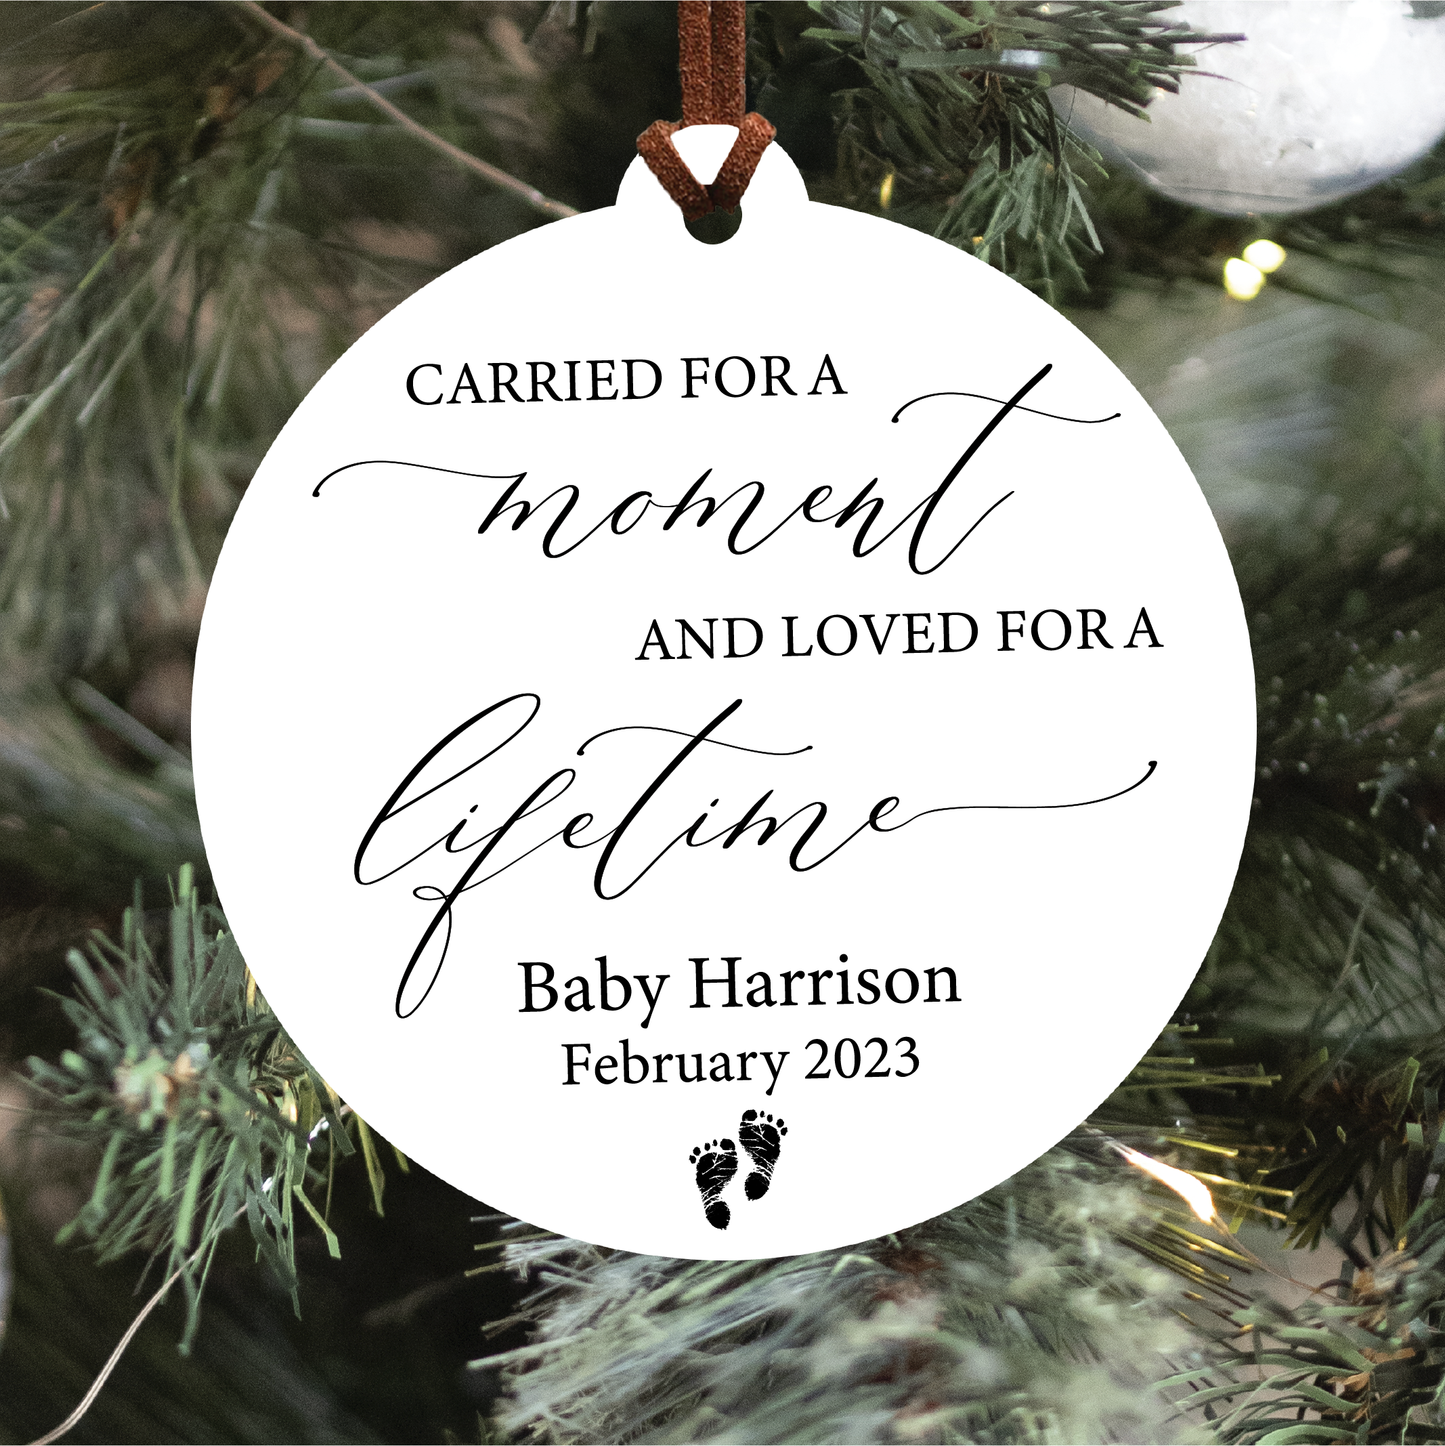 Carried For A Moment And Loved For A Lifetime Ornament